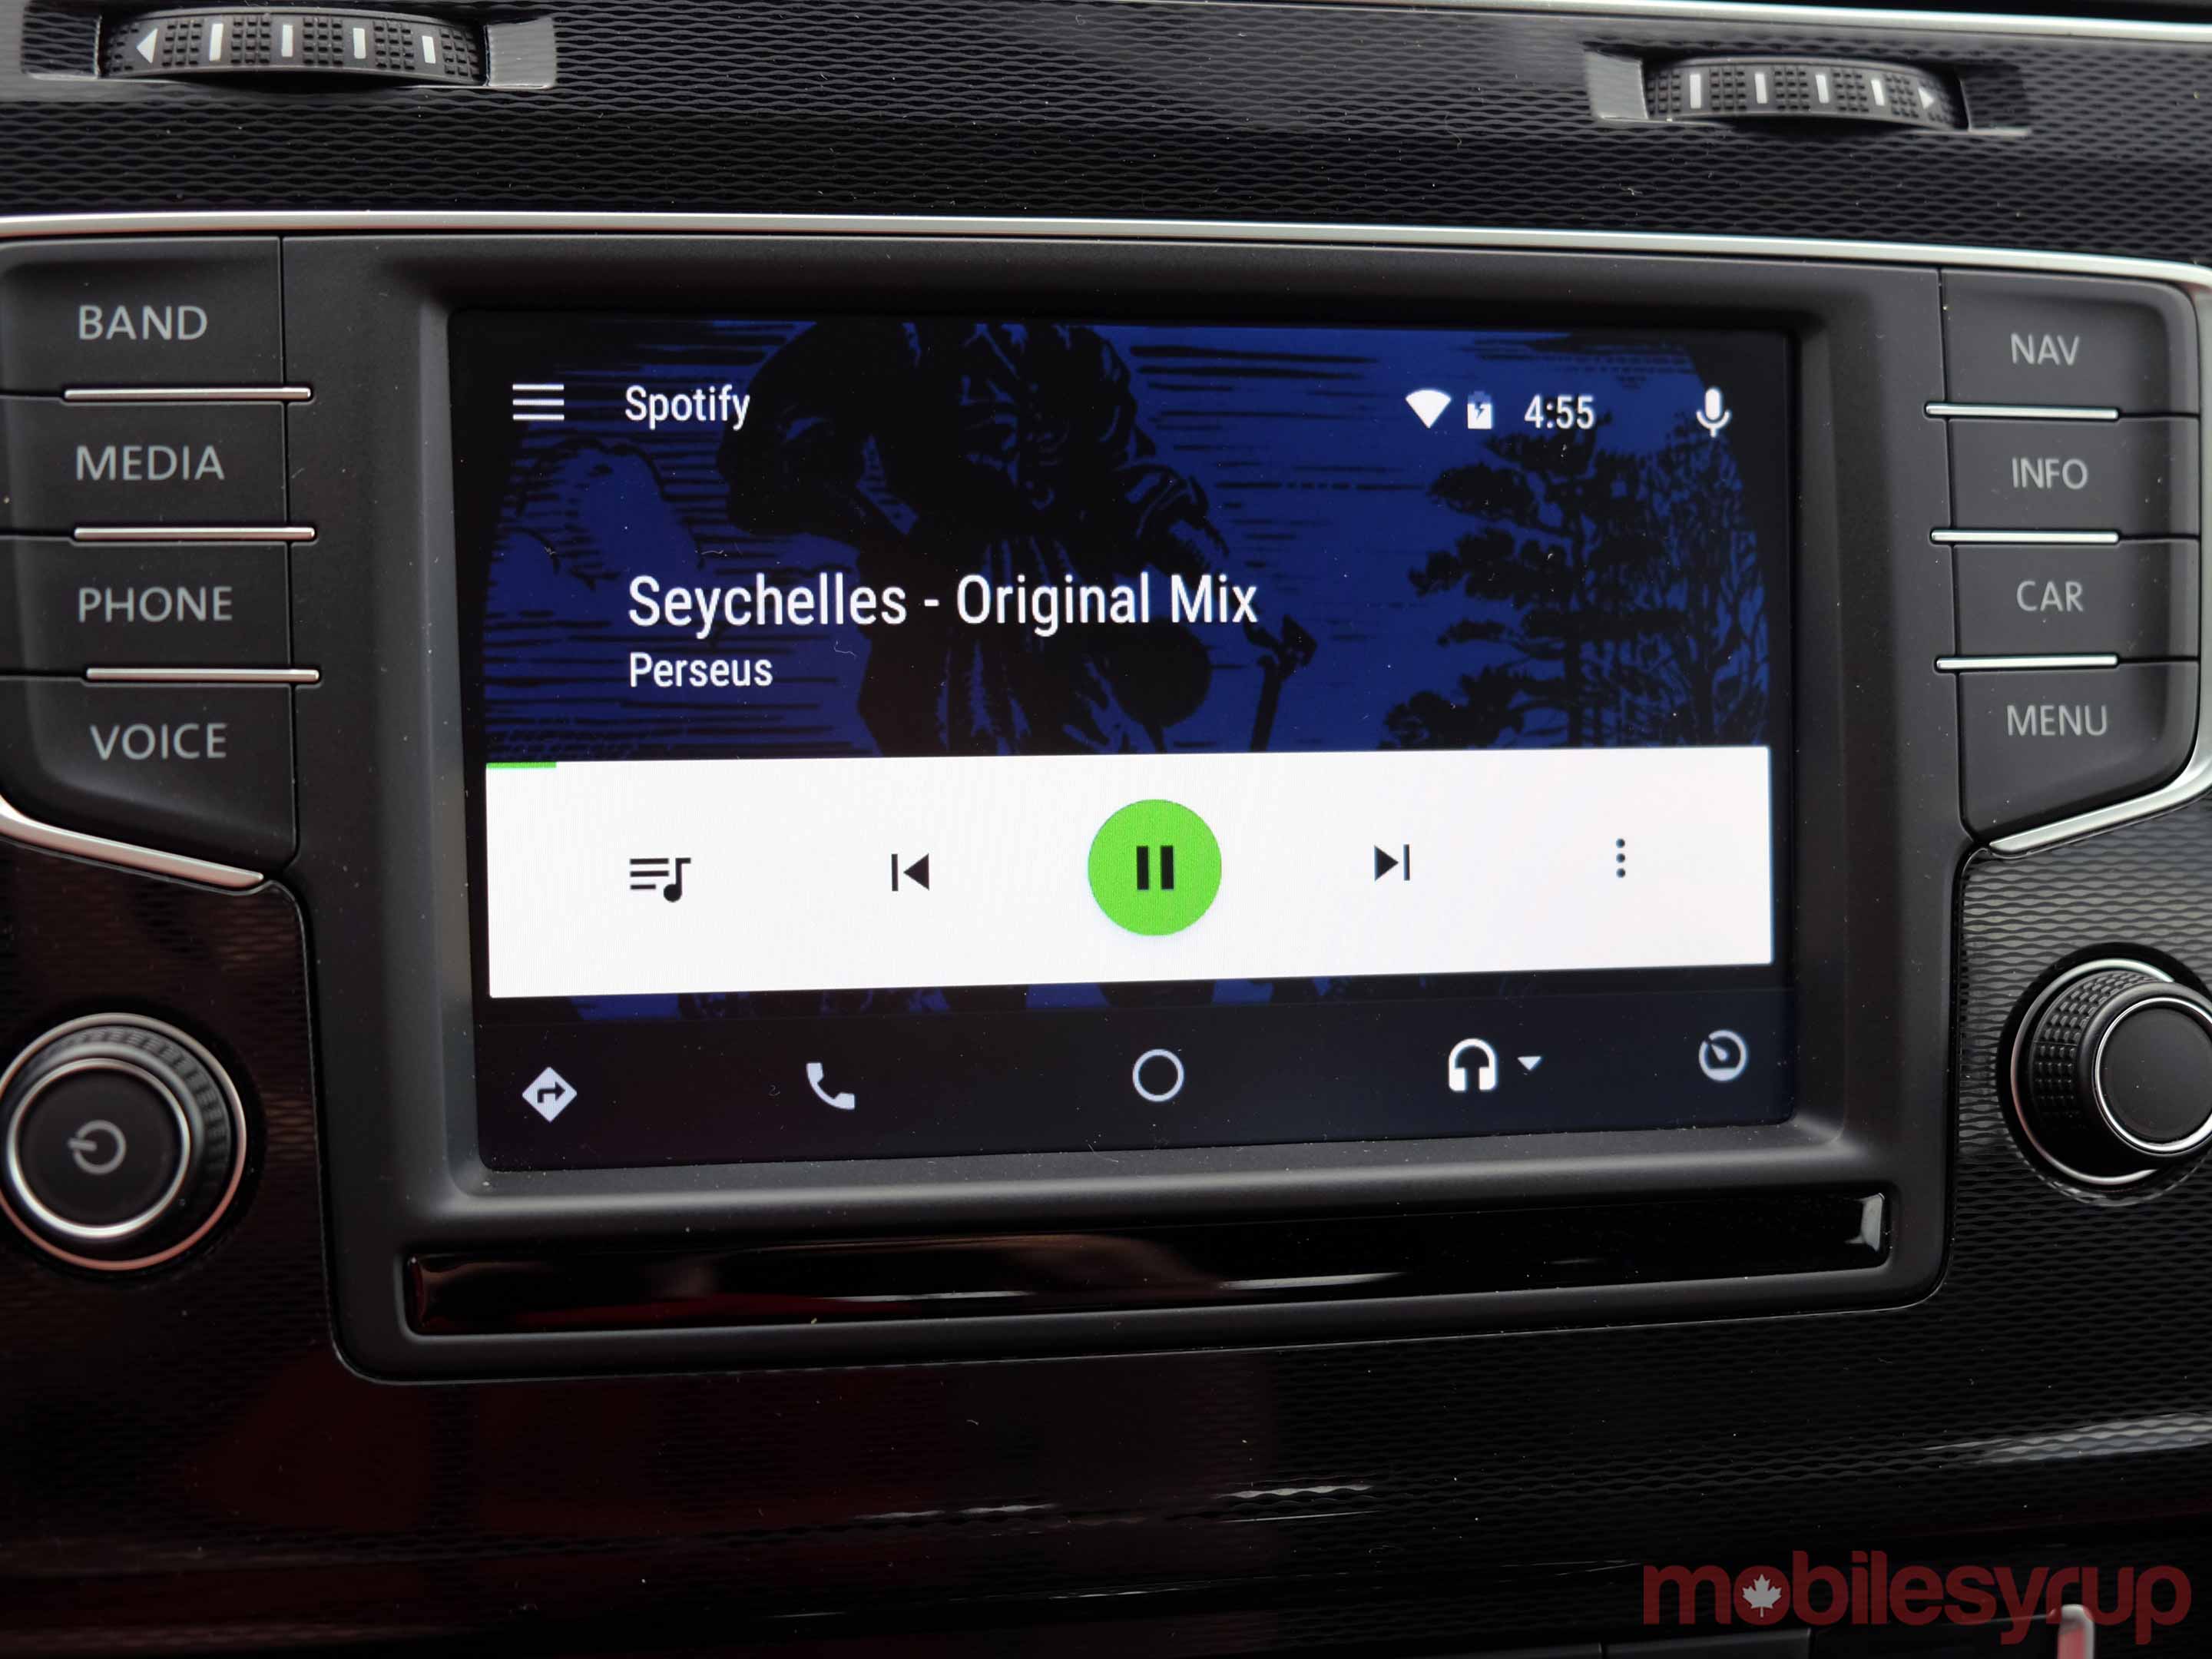 VW Android Auto